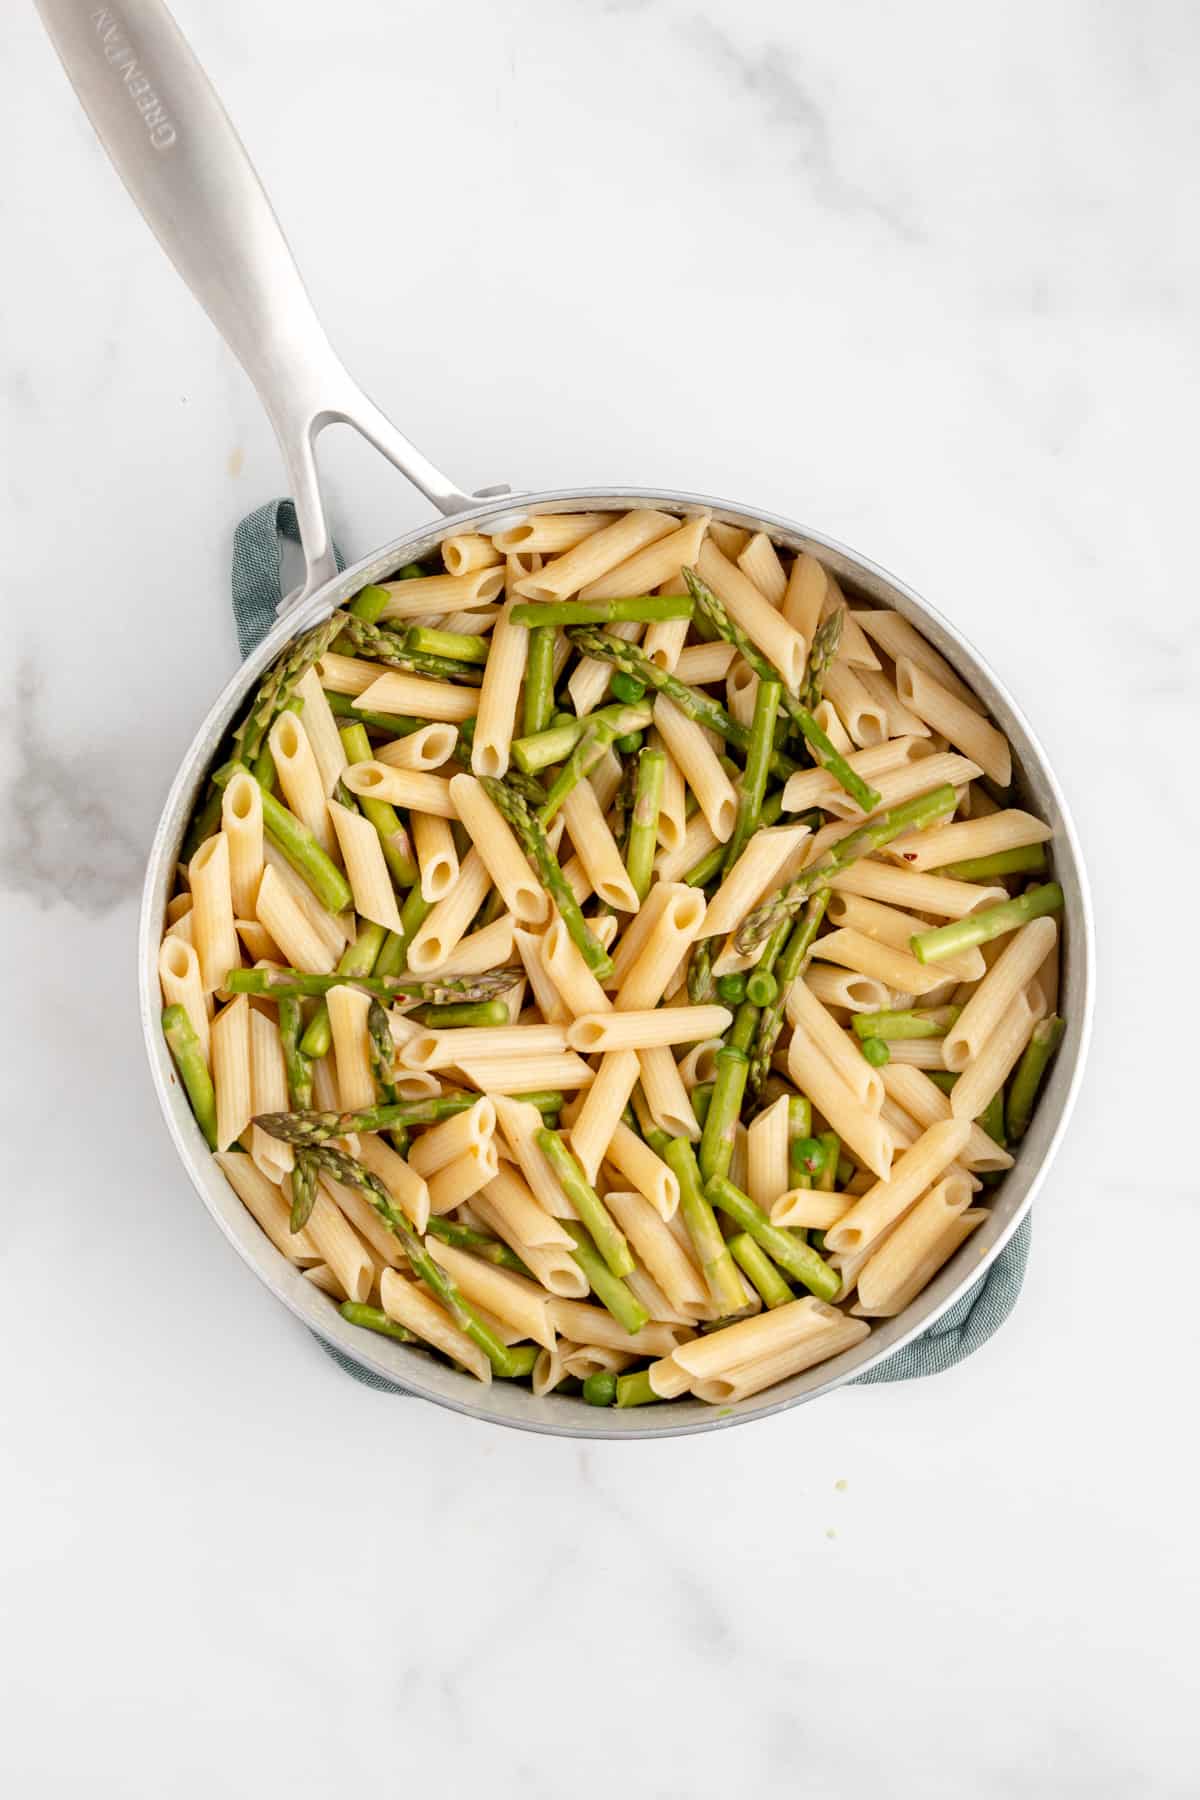 Cooked pasta in a pan with asparagus, peas, and butter sauce.